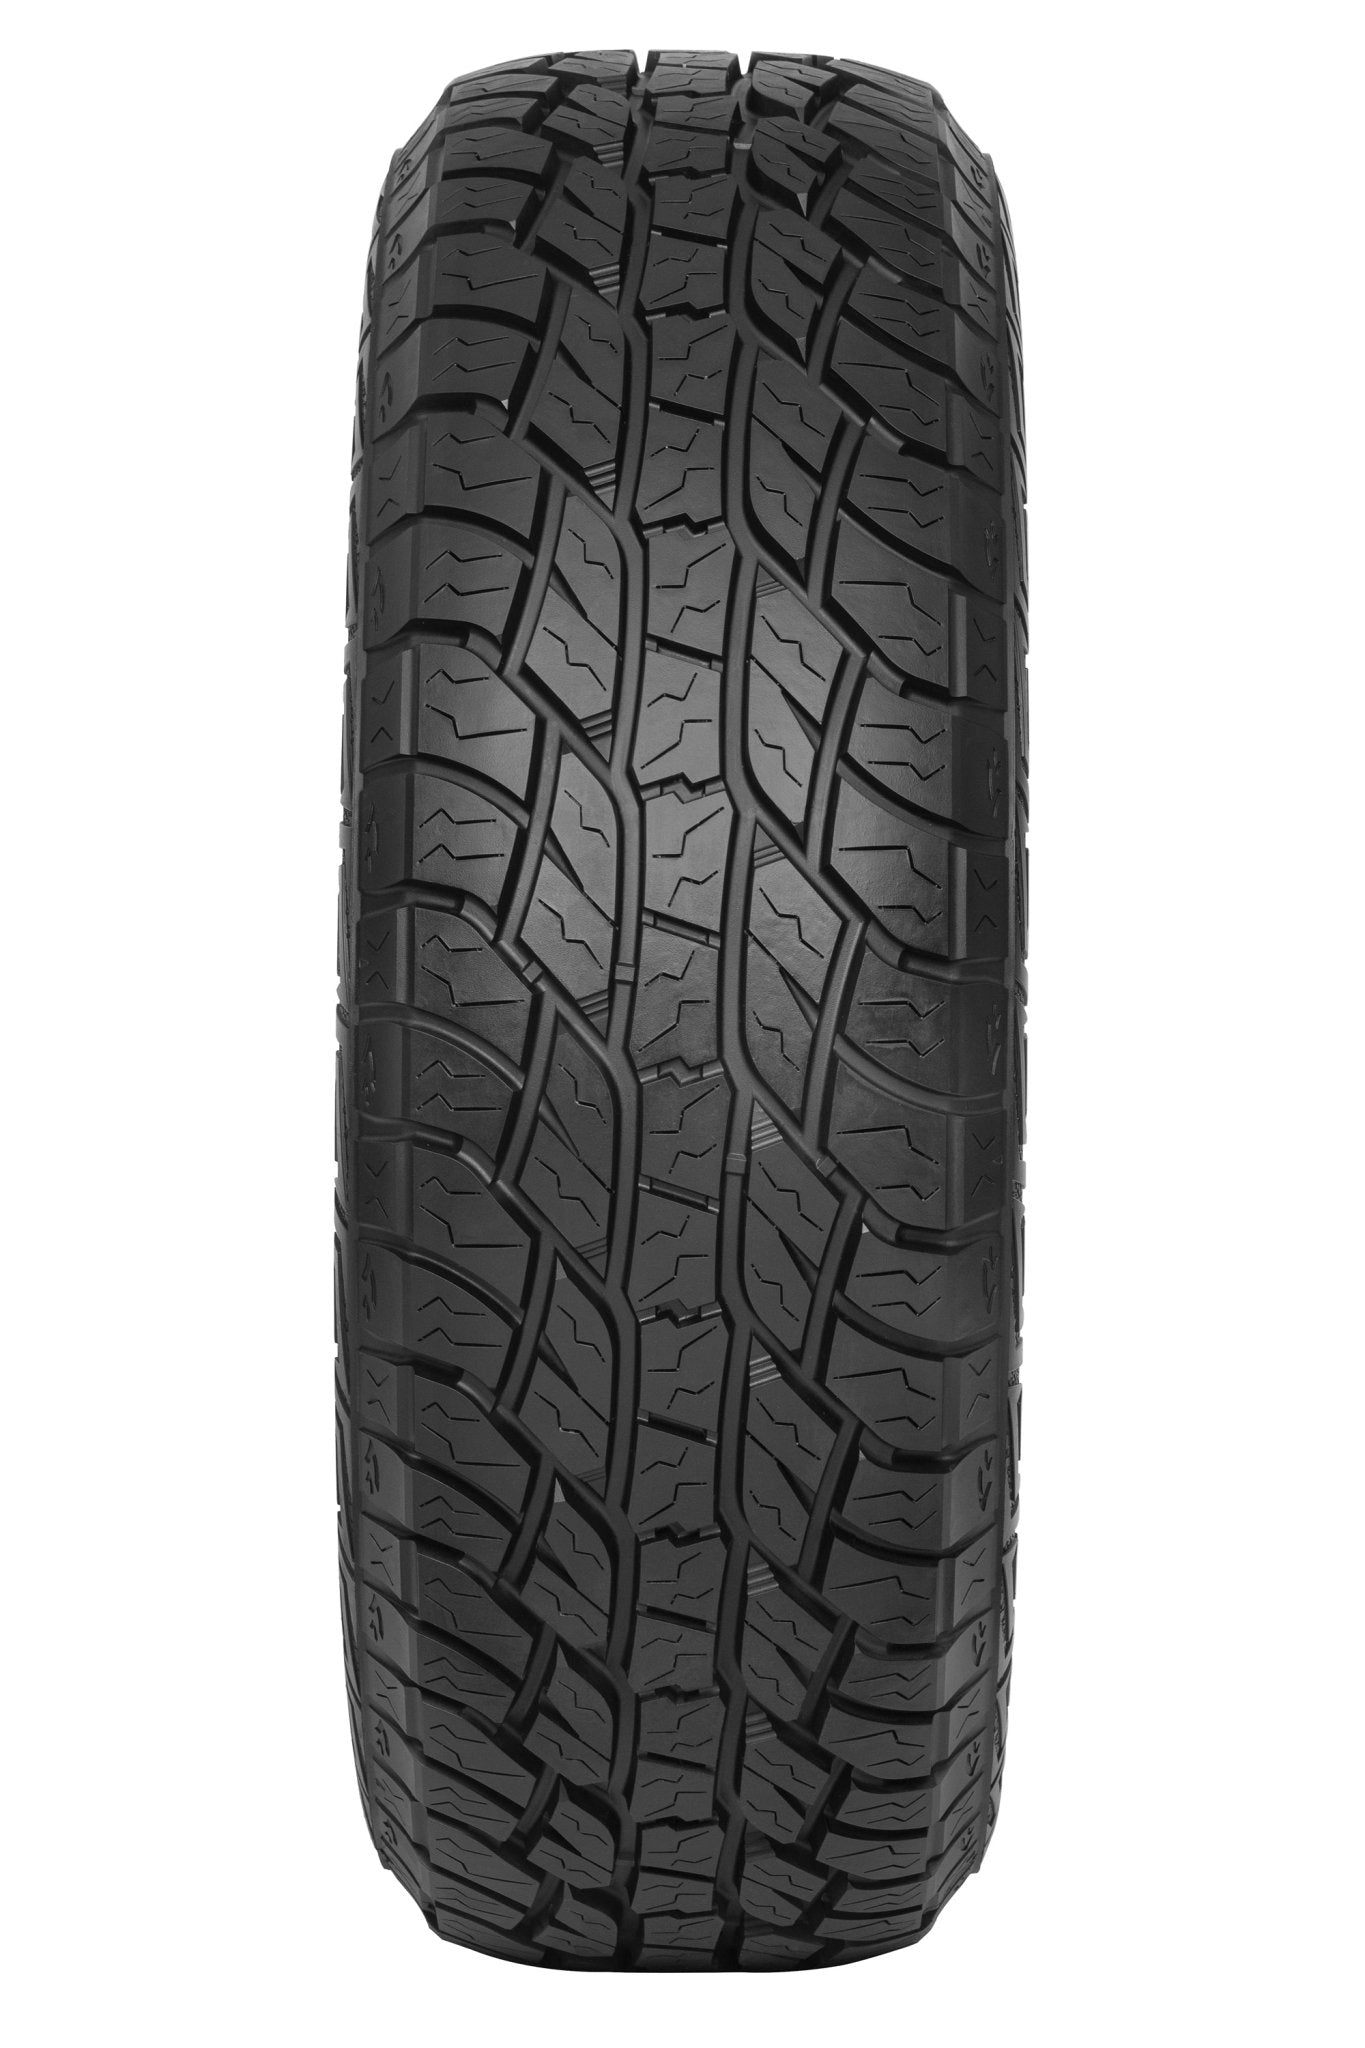 265/70R17 GRENLANDER MAGA A/T TWO PASSENGER - Toee Tire